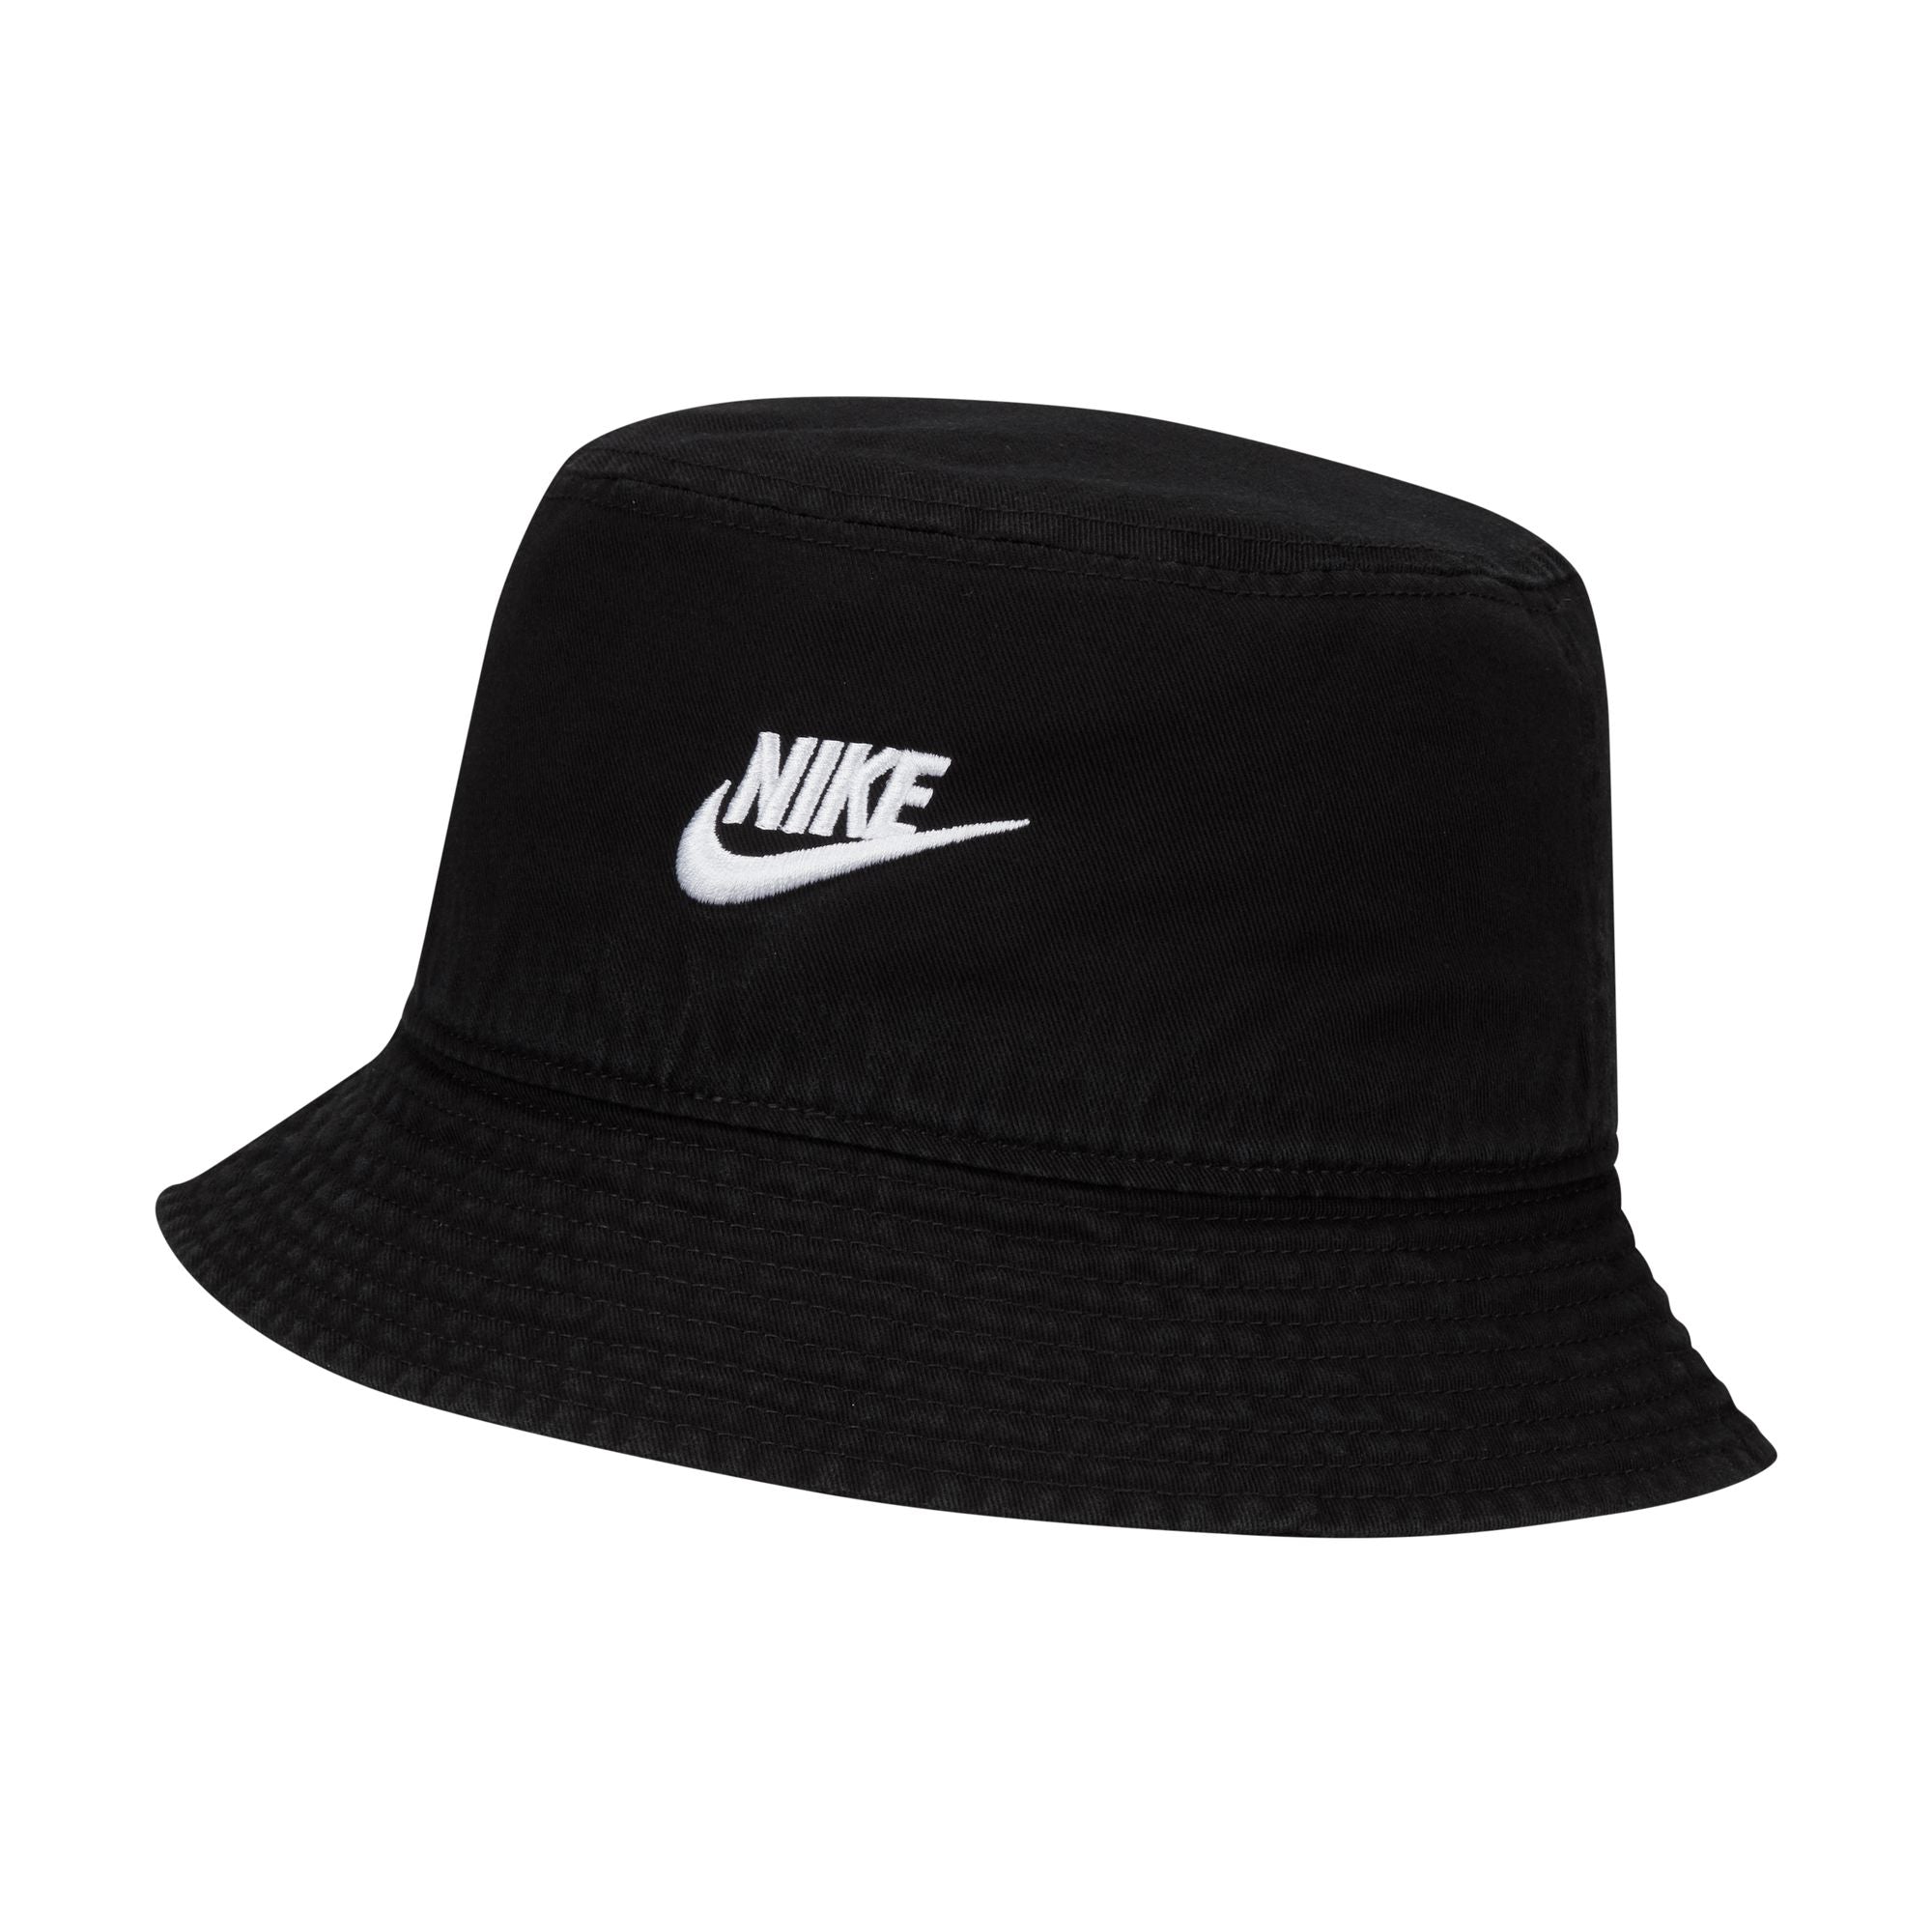 ﻿NIKE APEX ﻿FUTURA WASHED BUCKET HAT ﻿BLACK/WHITE – Park Outlet Ph